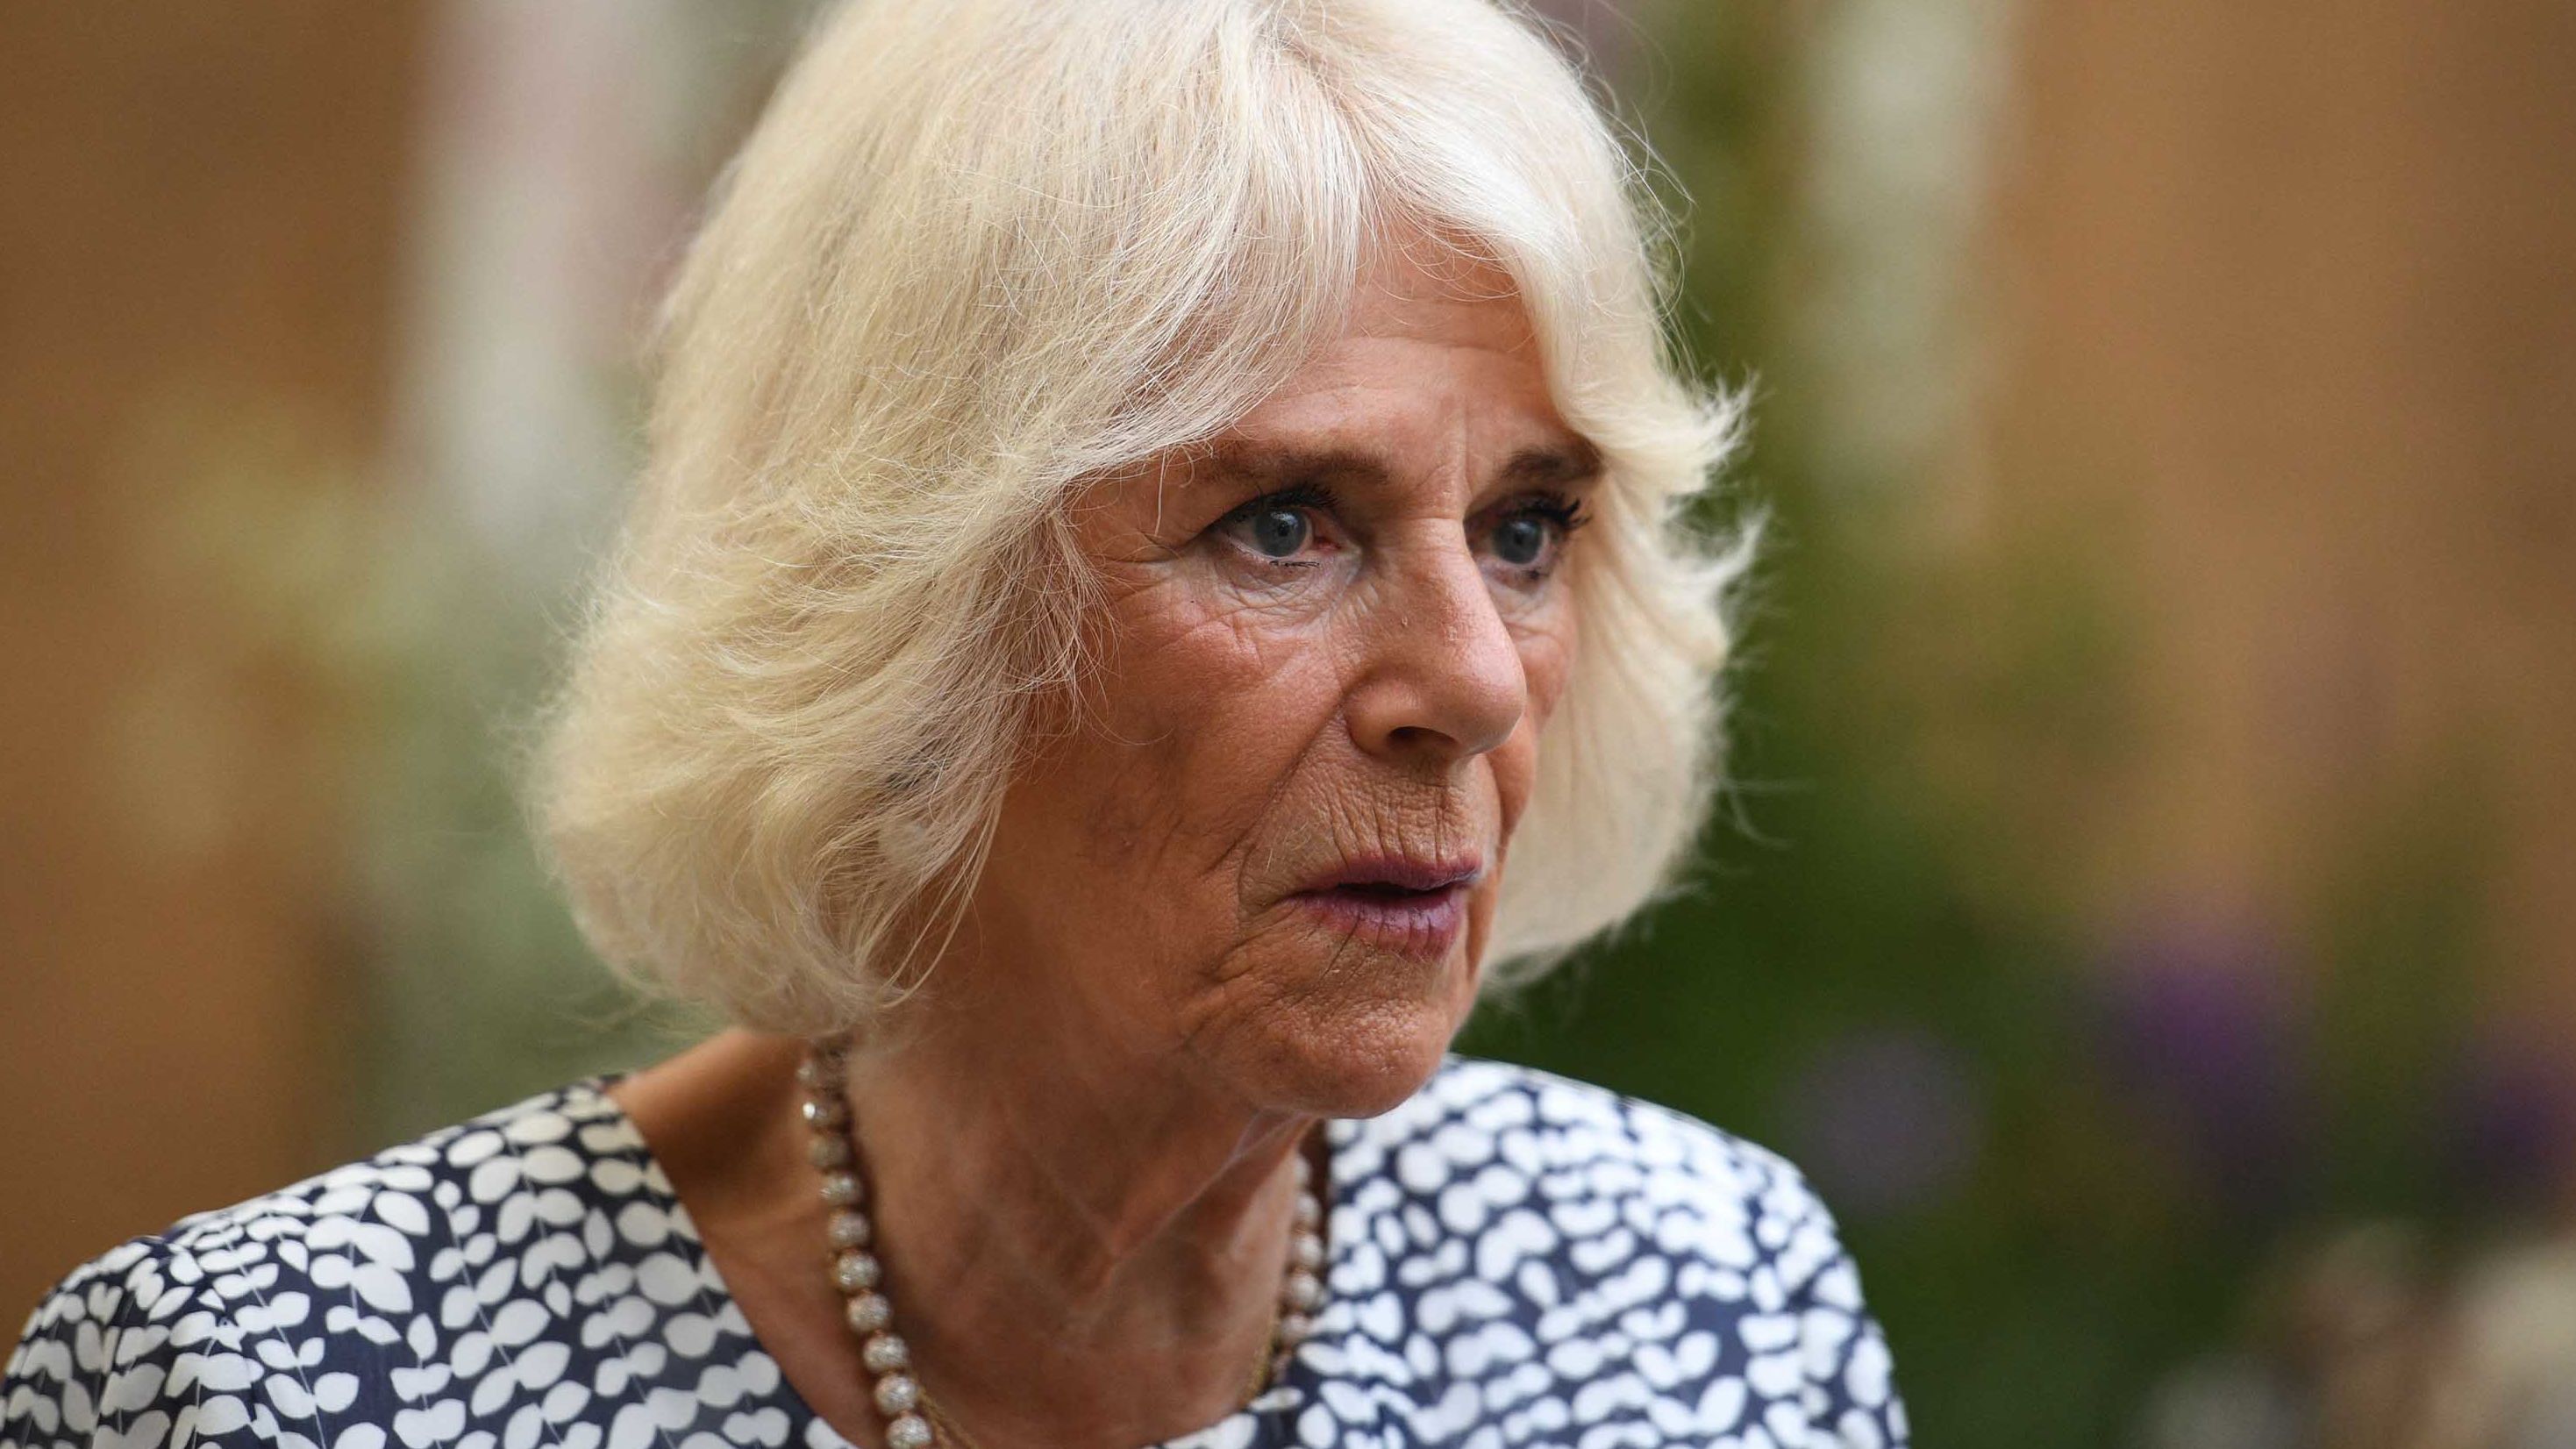 Camilla, Duchess of Cornwall speaks during an event in June.